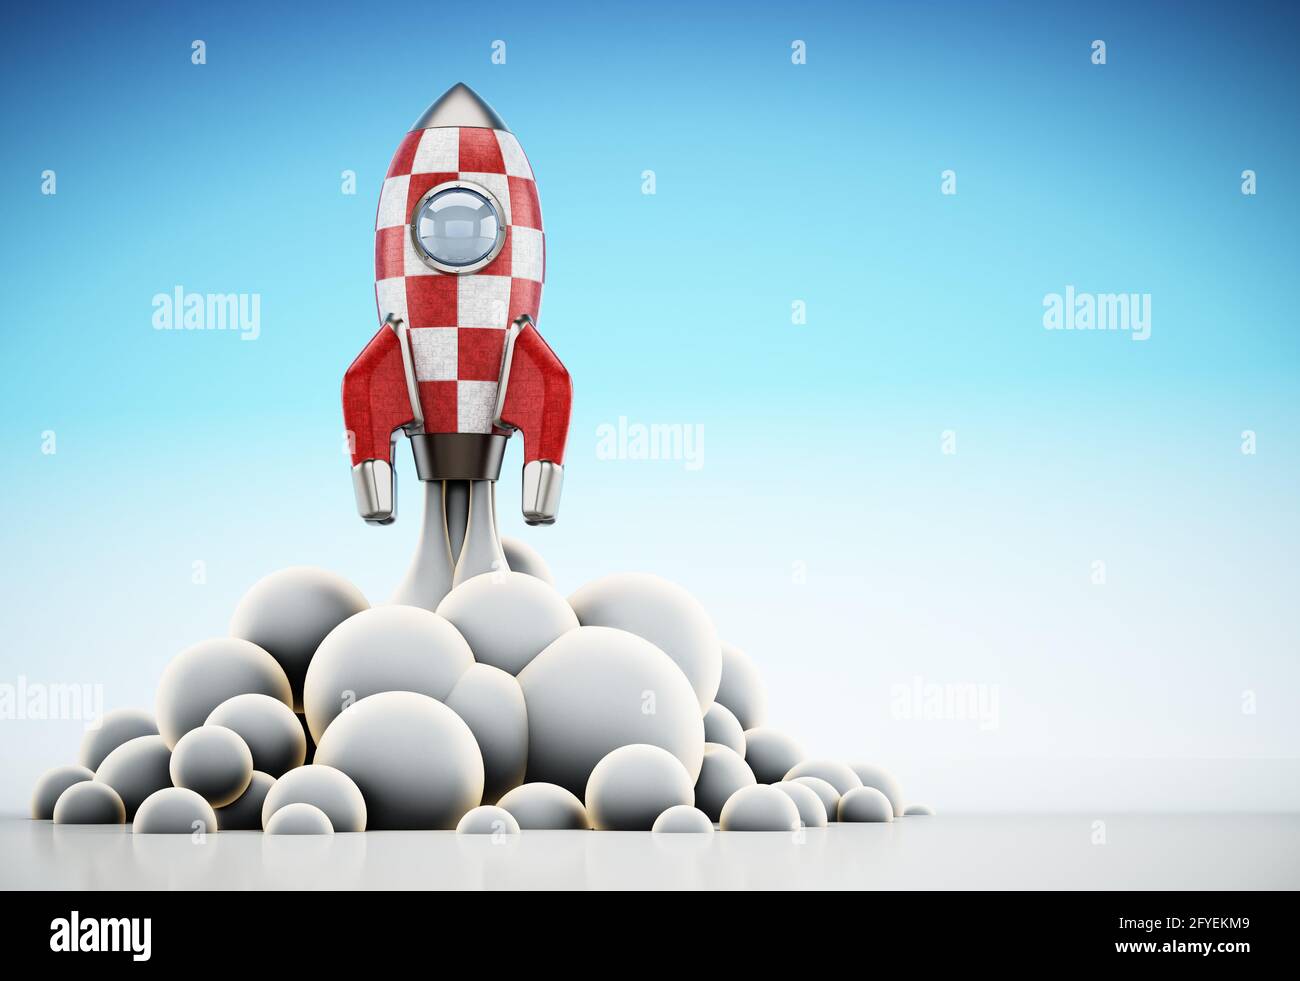 Vintage rocket ship launching to space. 3D illustration. Stock Photo